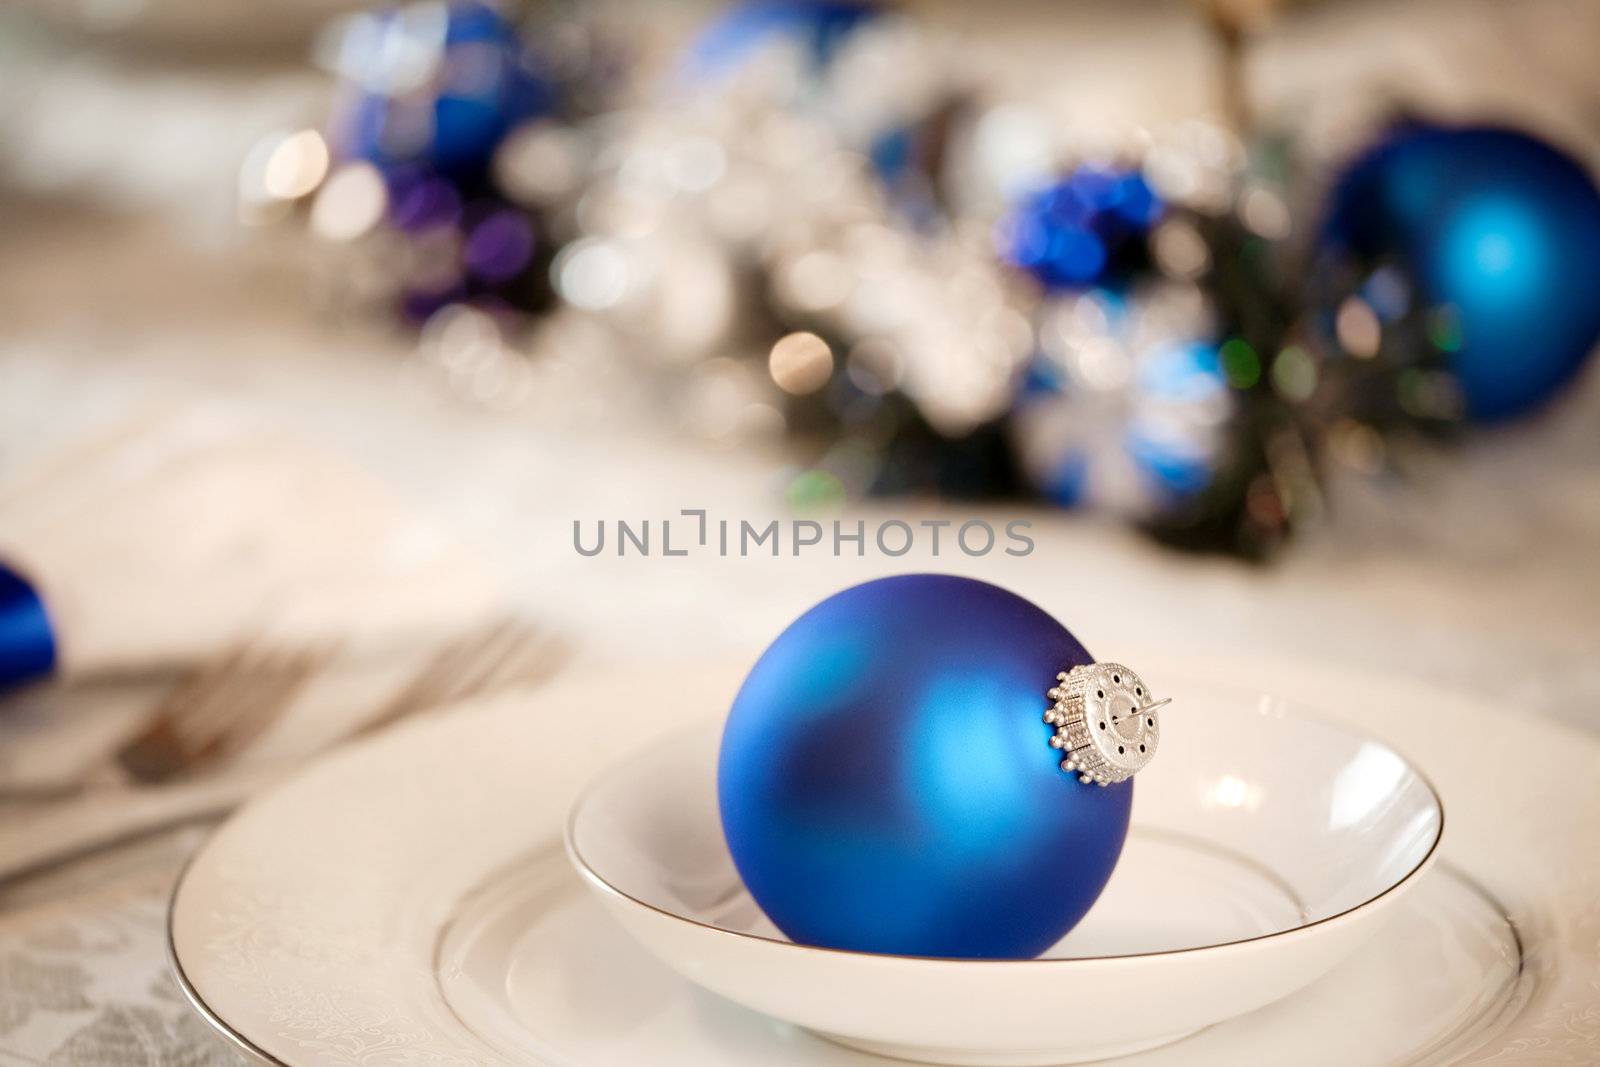 White and blue Christmas decorations for Christmas